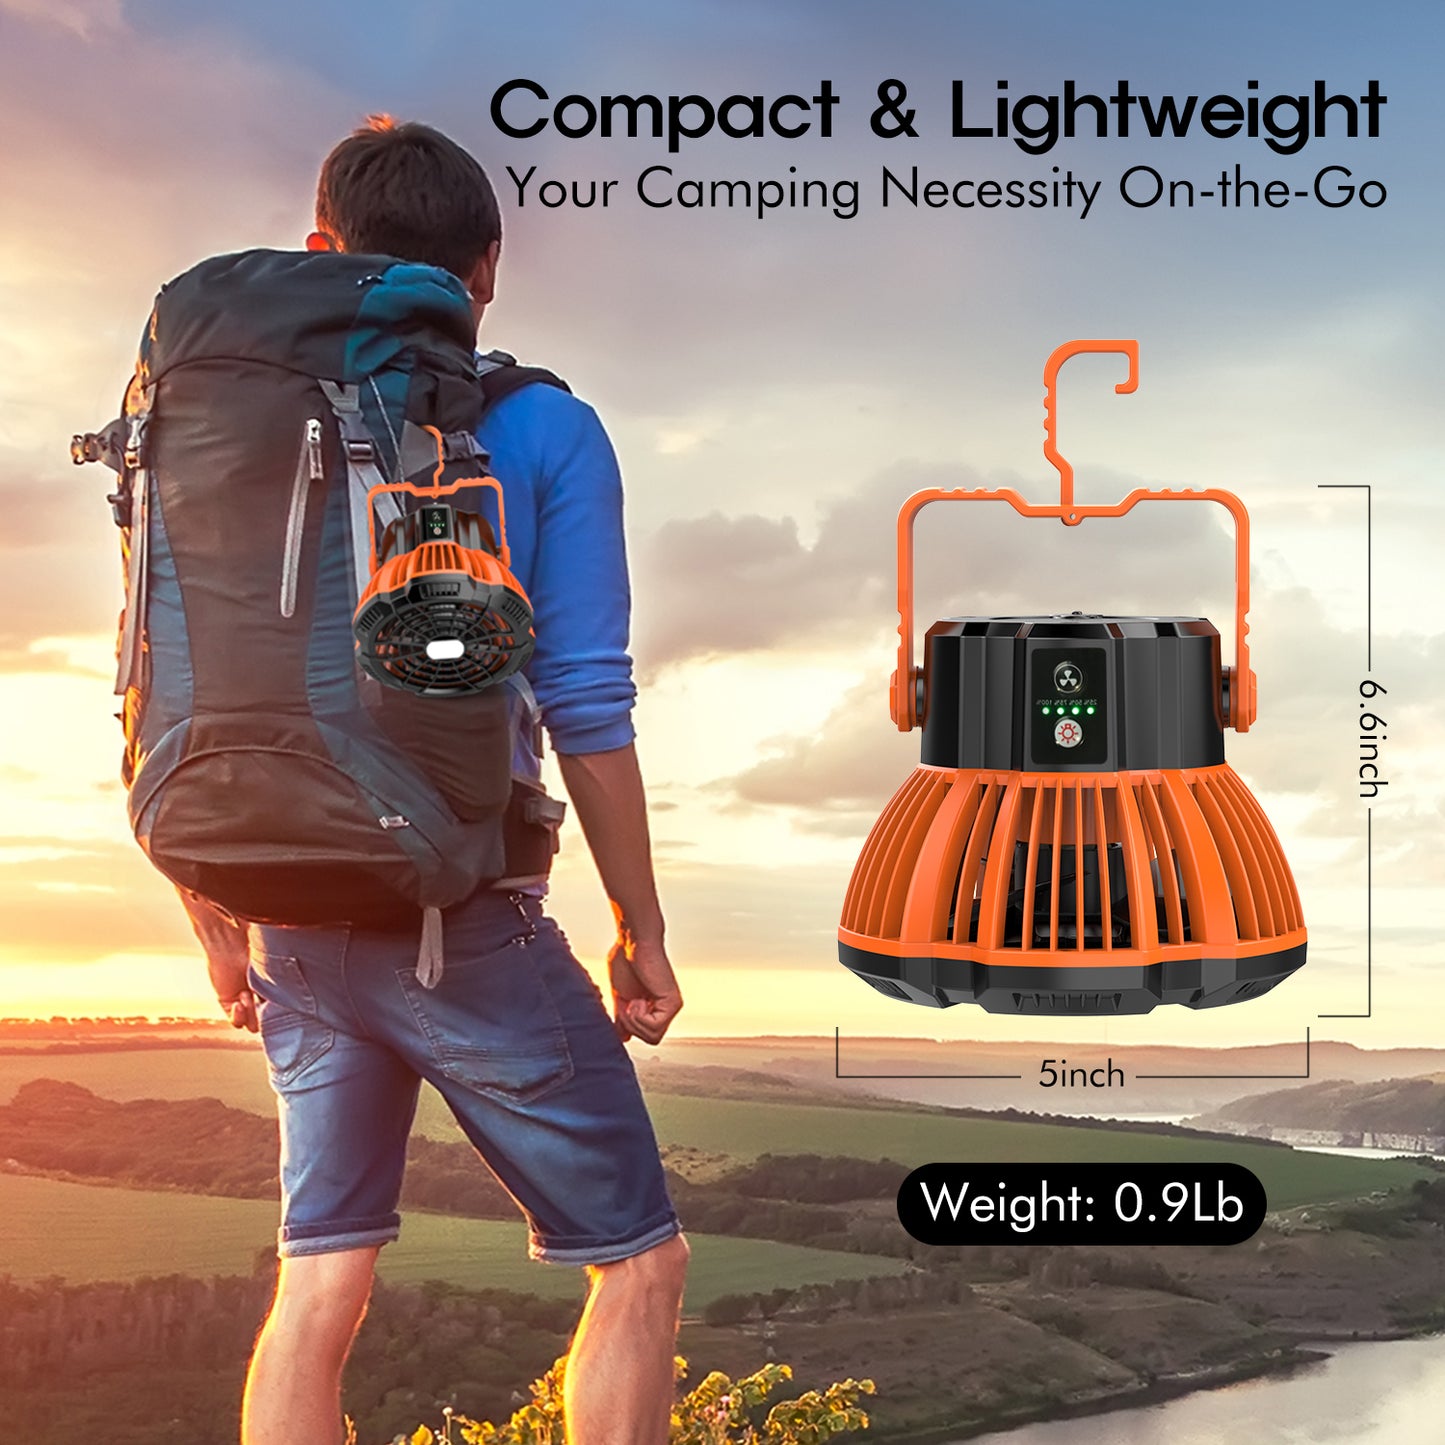 Portable Fan Camping Fan for Tents, 30 Hours Work-time Camping Lantern Ceiling Tent Fan with Remote Control, Power Bank, USB Rechargeable Fan, 180°Head Rotation Camping Accessories for Fishing, Outdoor, Office